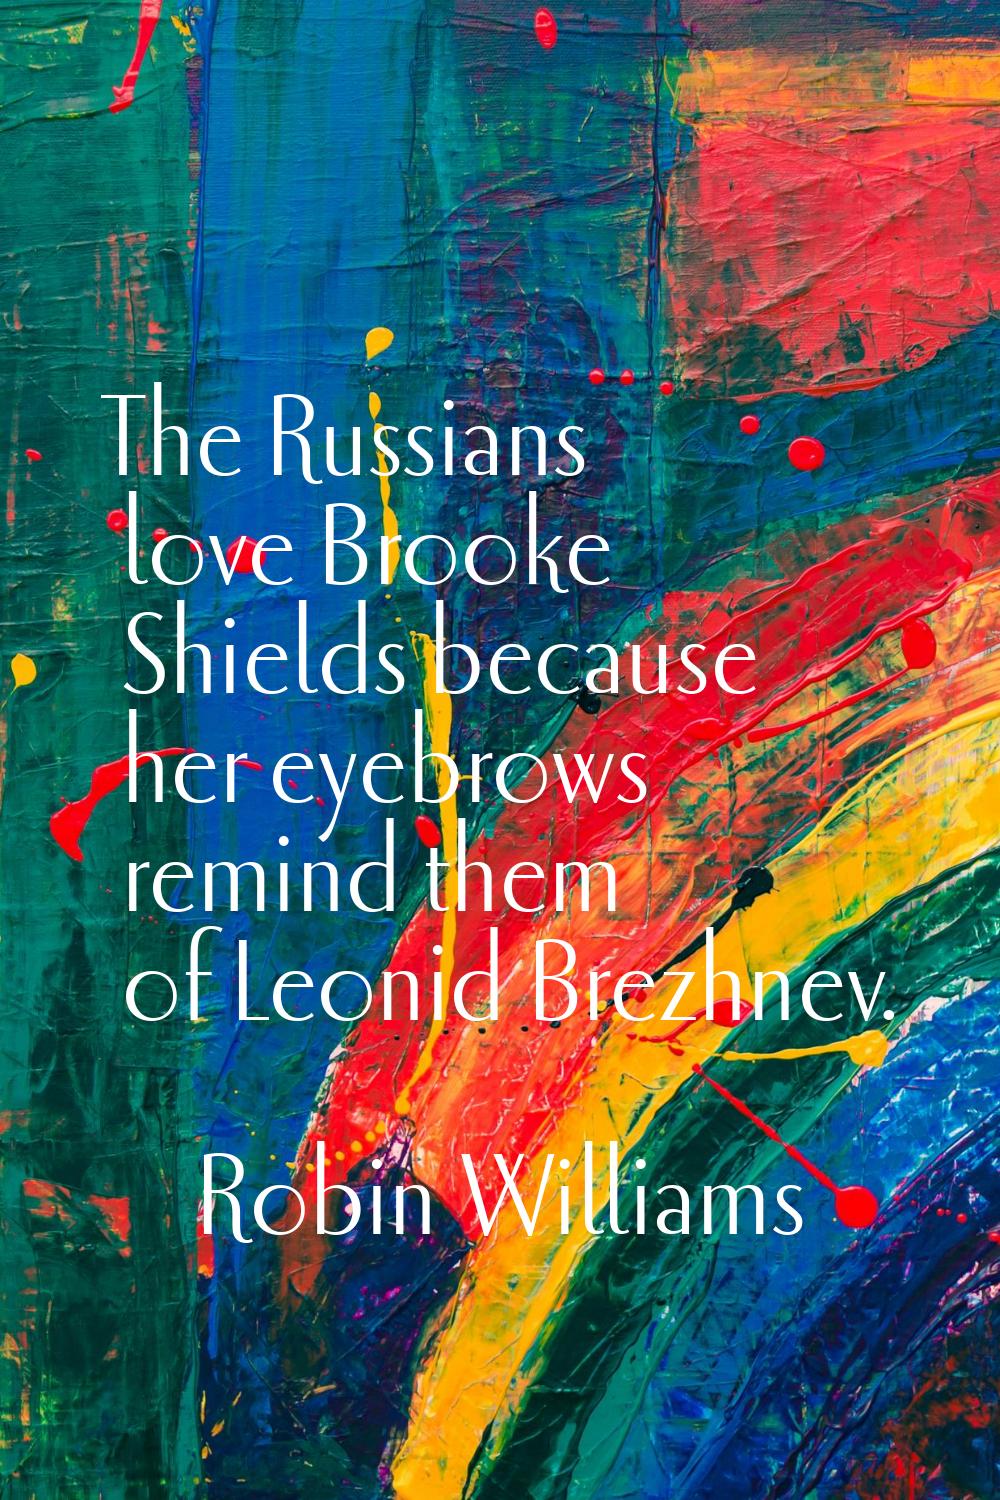 The Russians love Brooke Shields because her eyebrows remind them of Leonid Brezhnev.